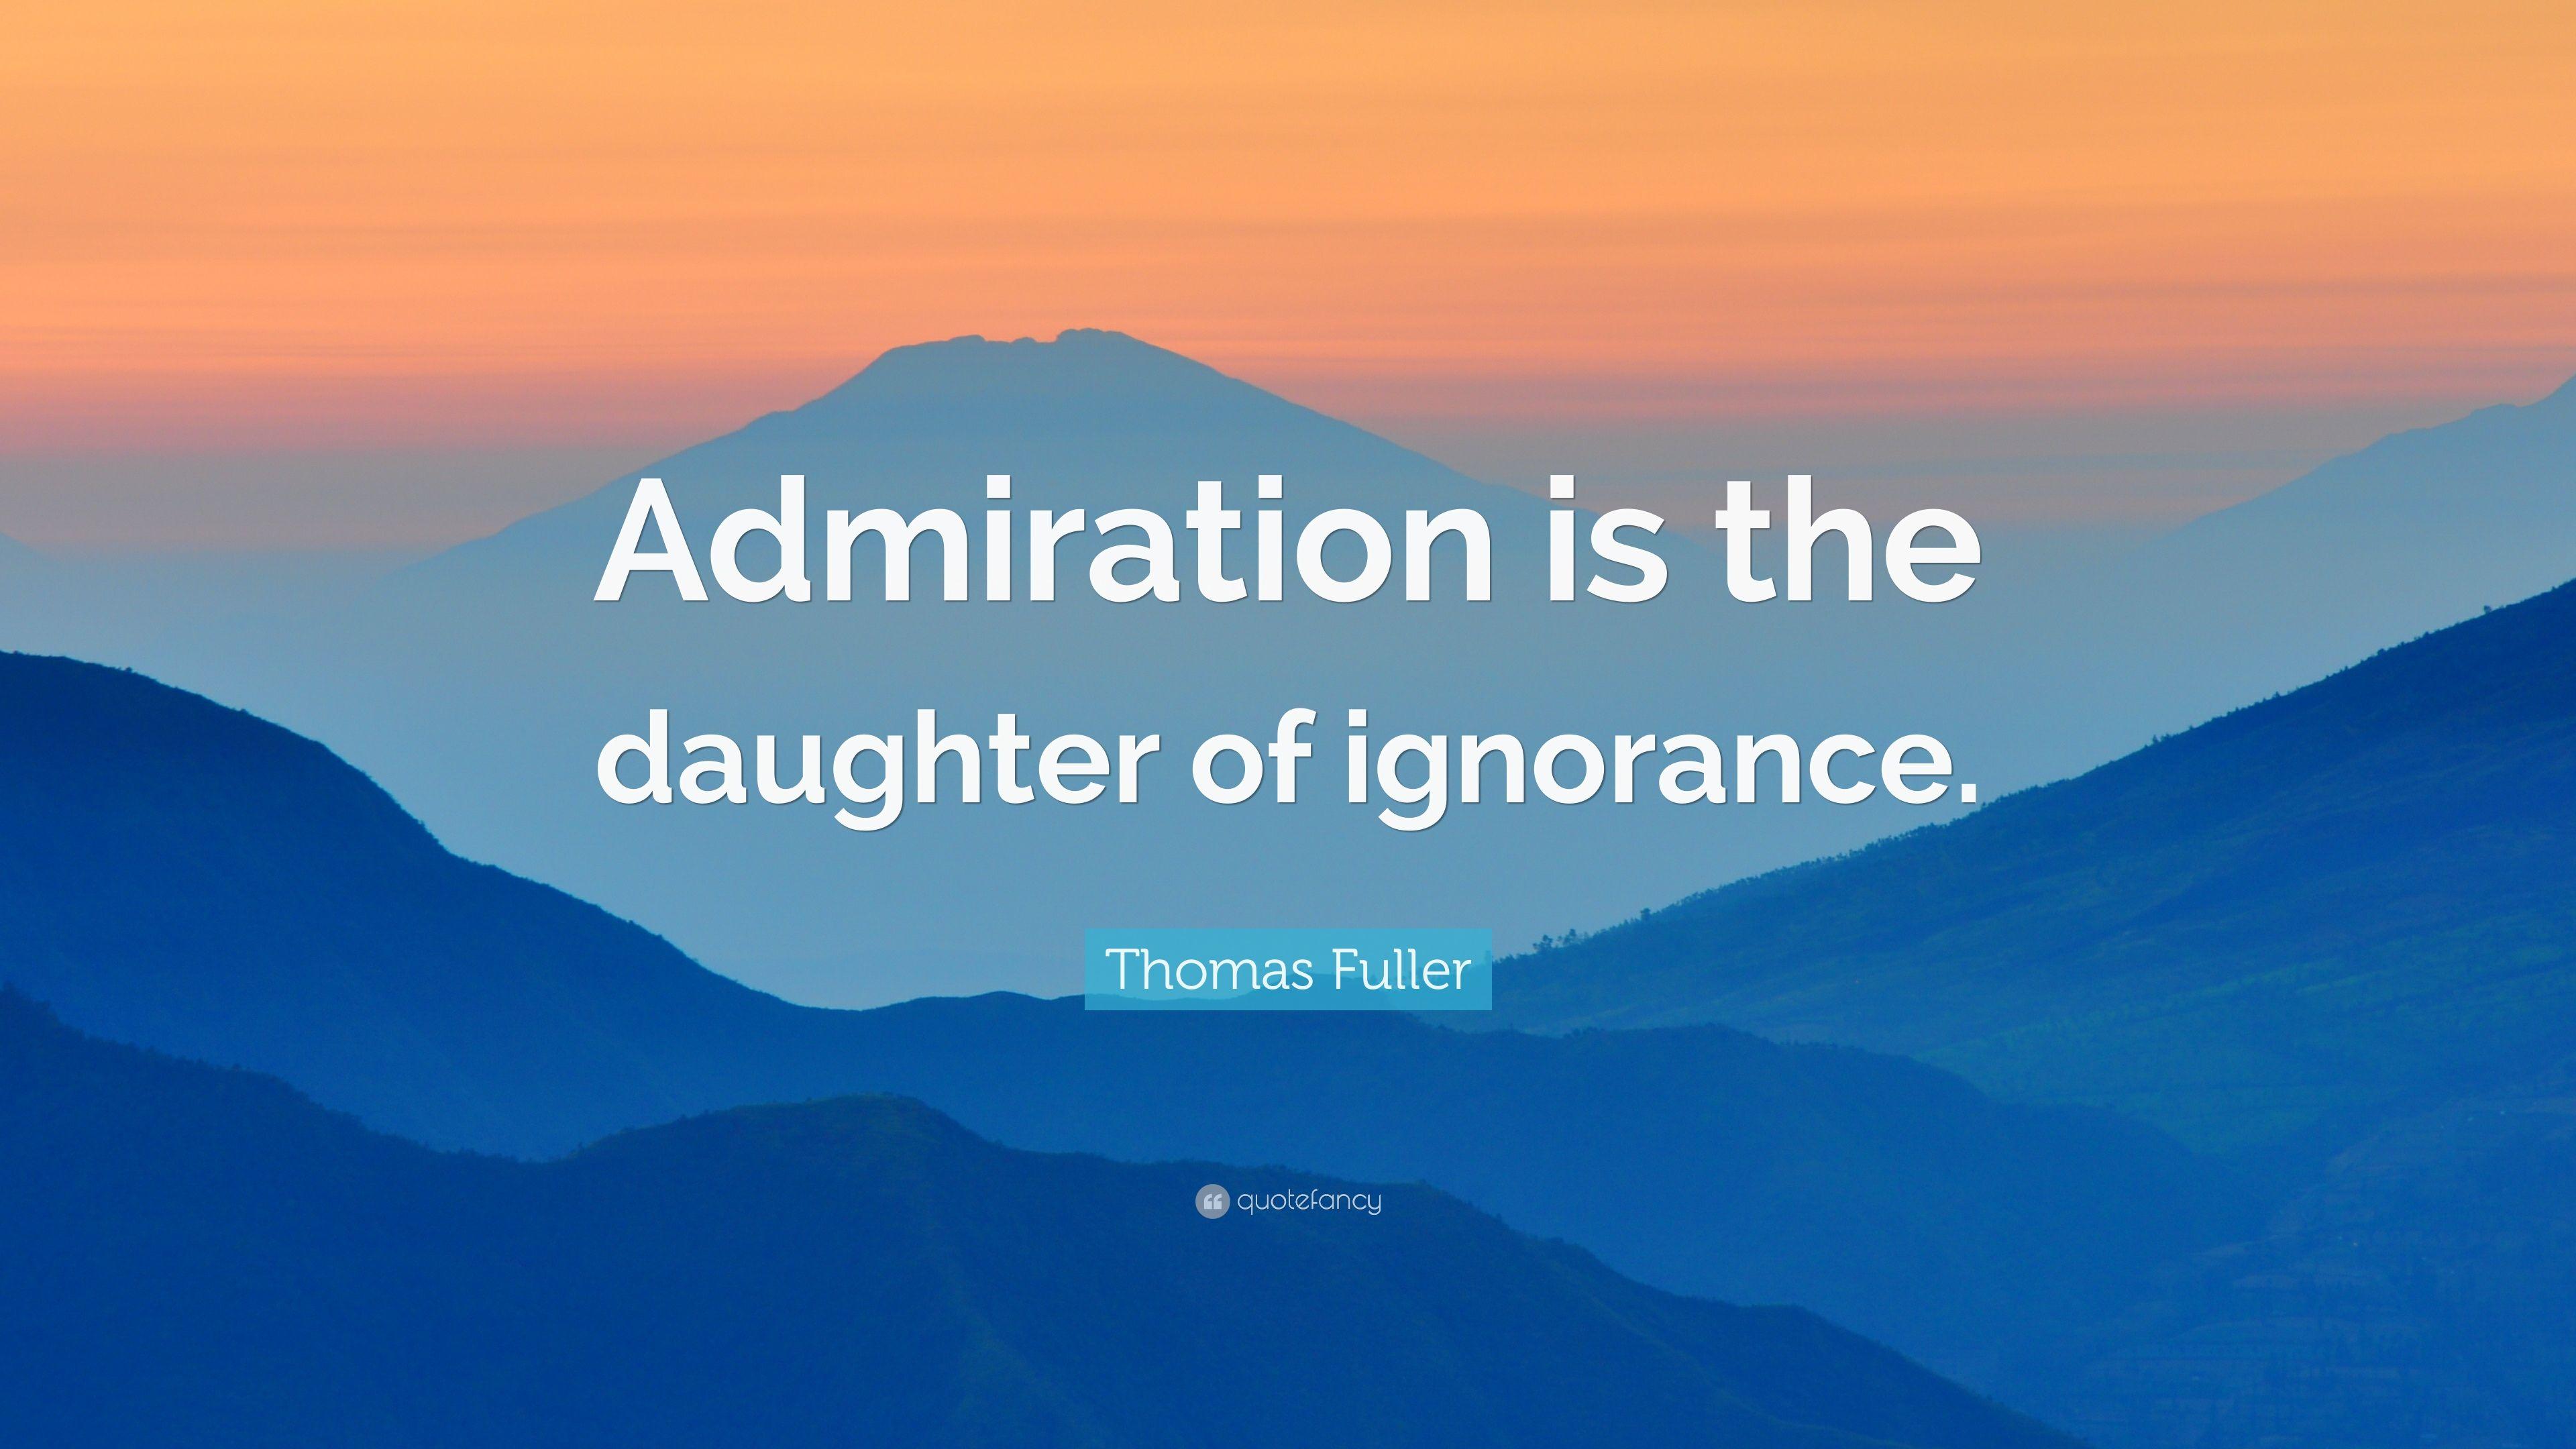 Thomas Fuller Quote: “Admiration is the daughter of ignorance